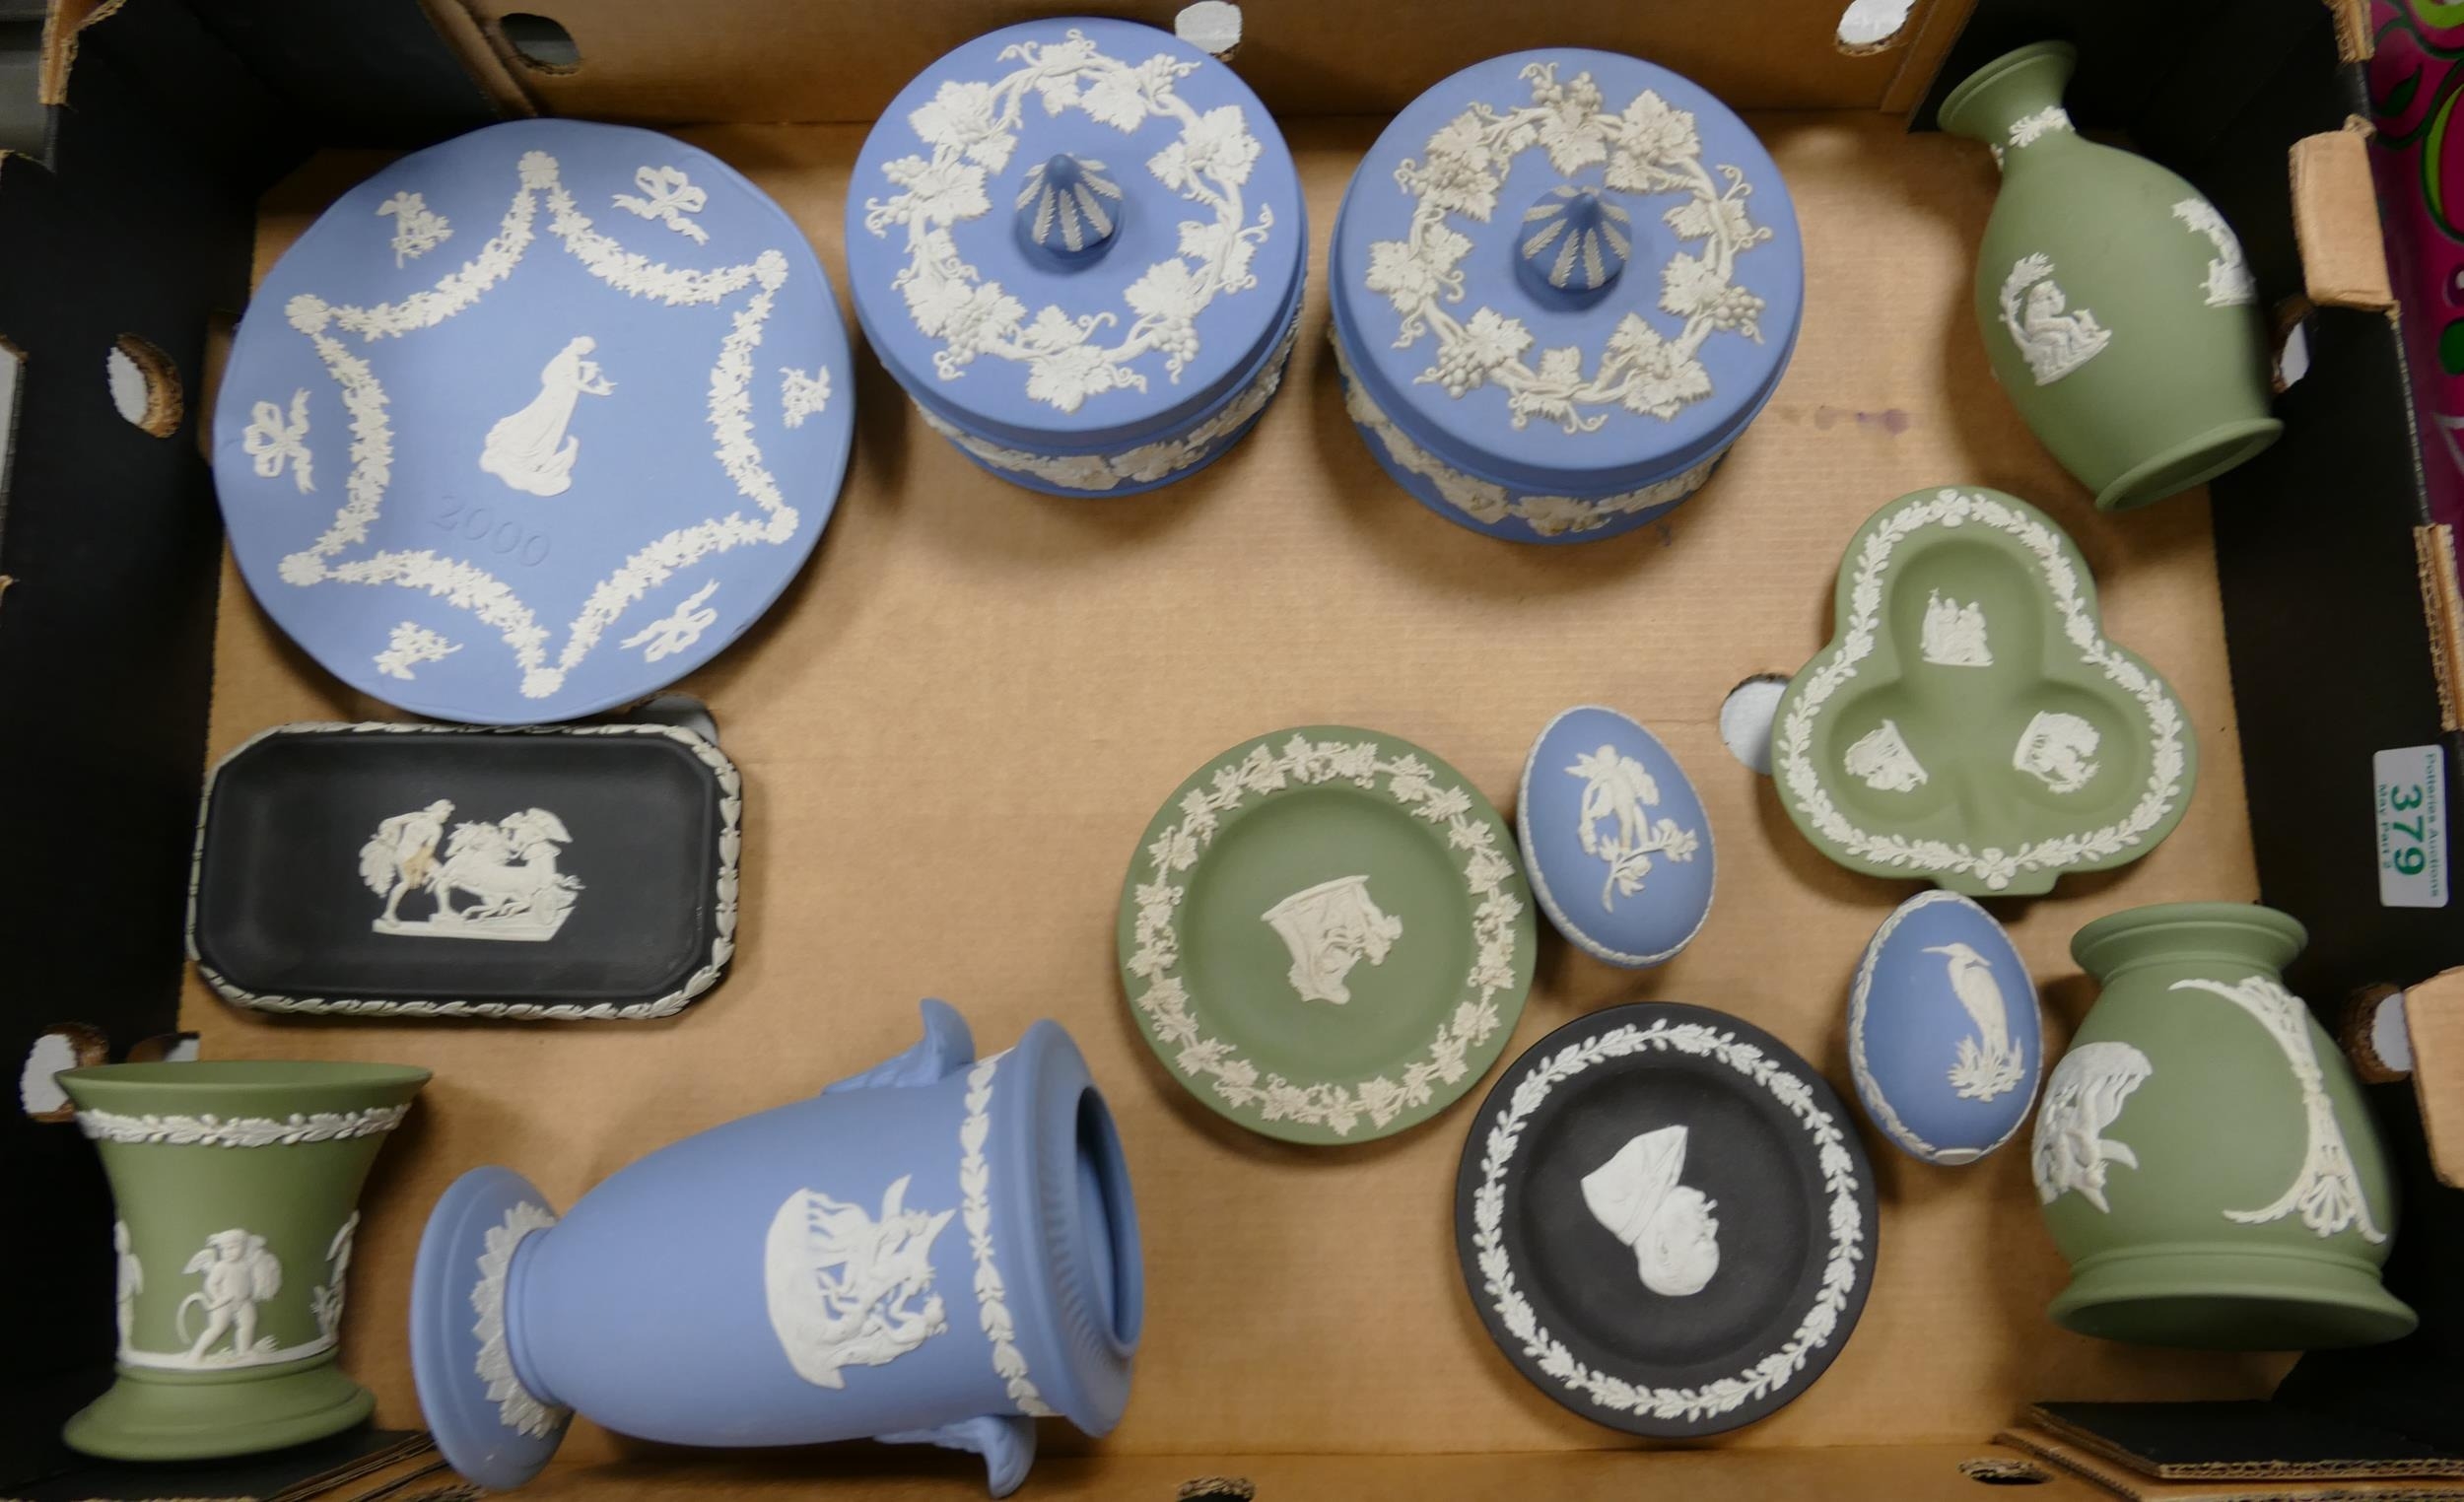 A collection of Wedgwood Jasperware to include black basalt pin dishes, green vases, blue lidded